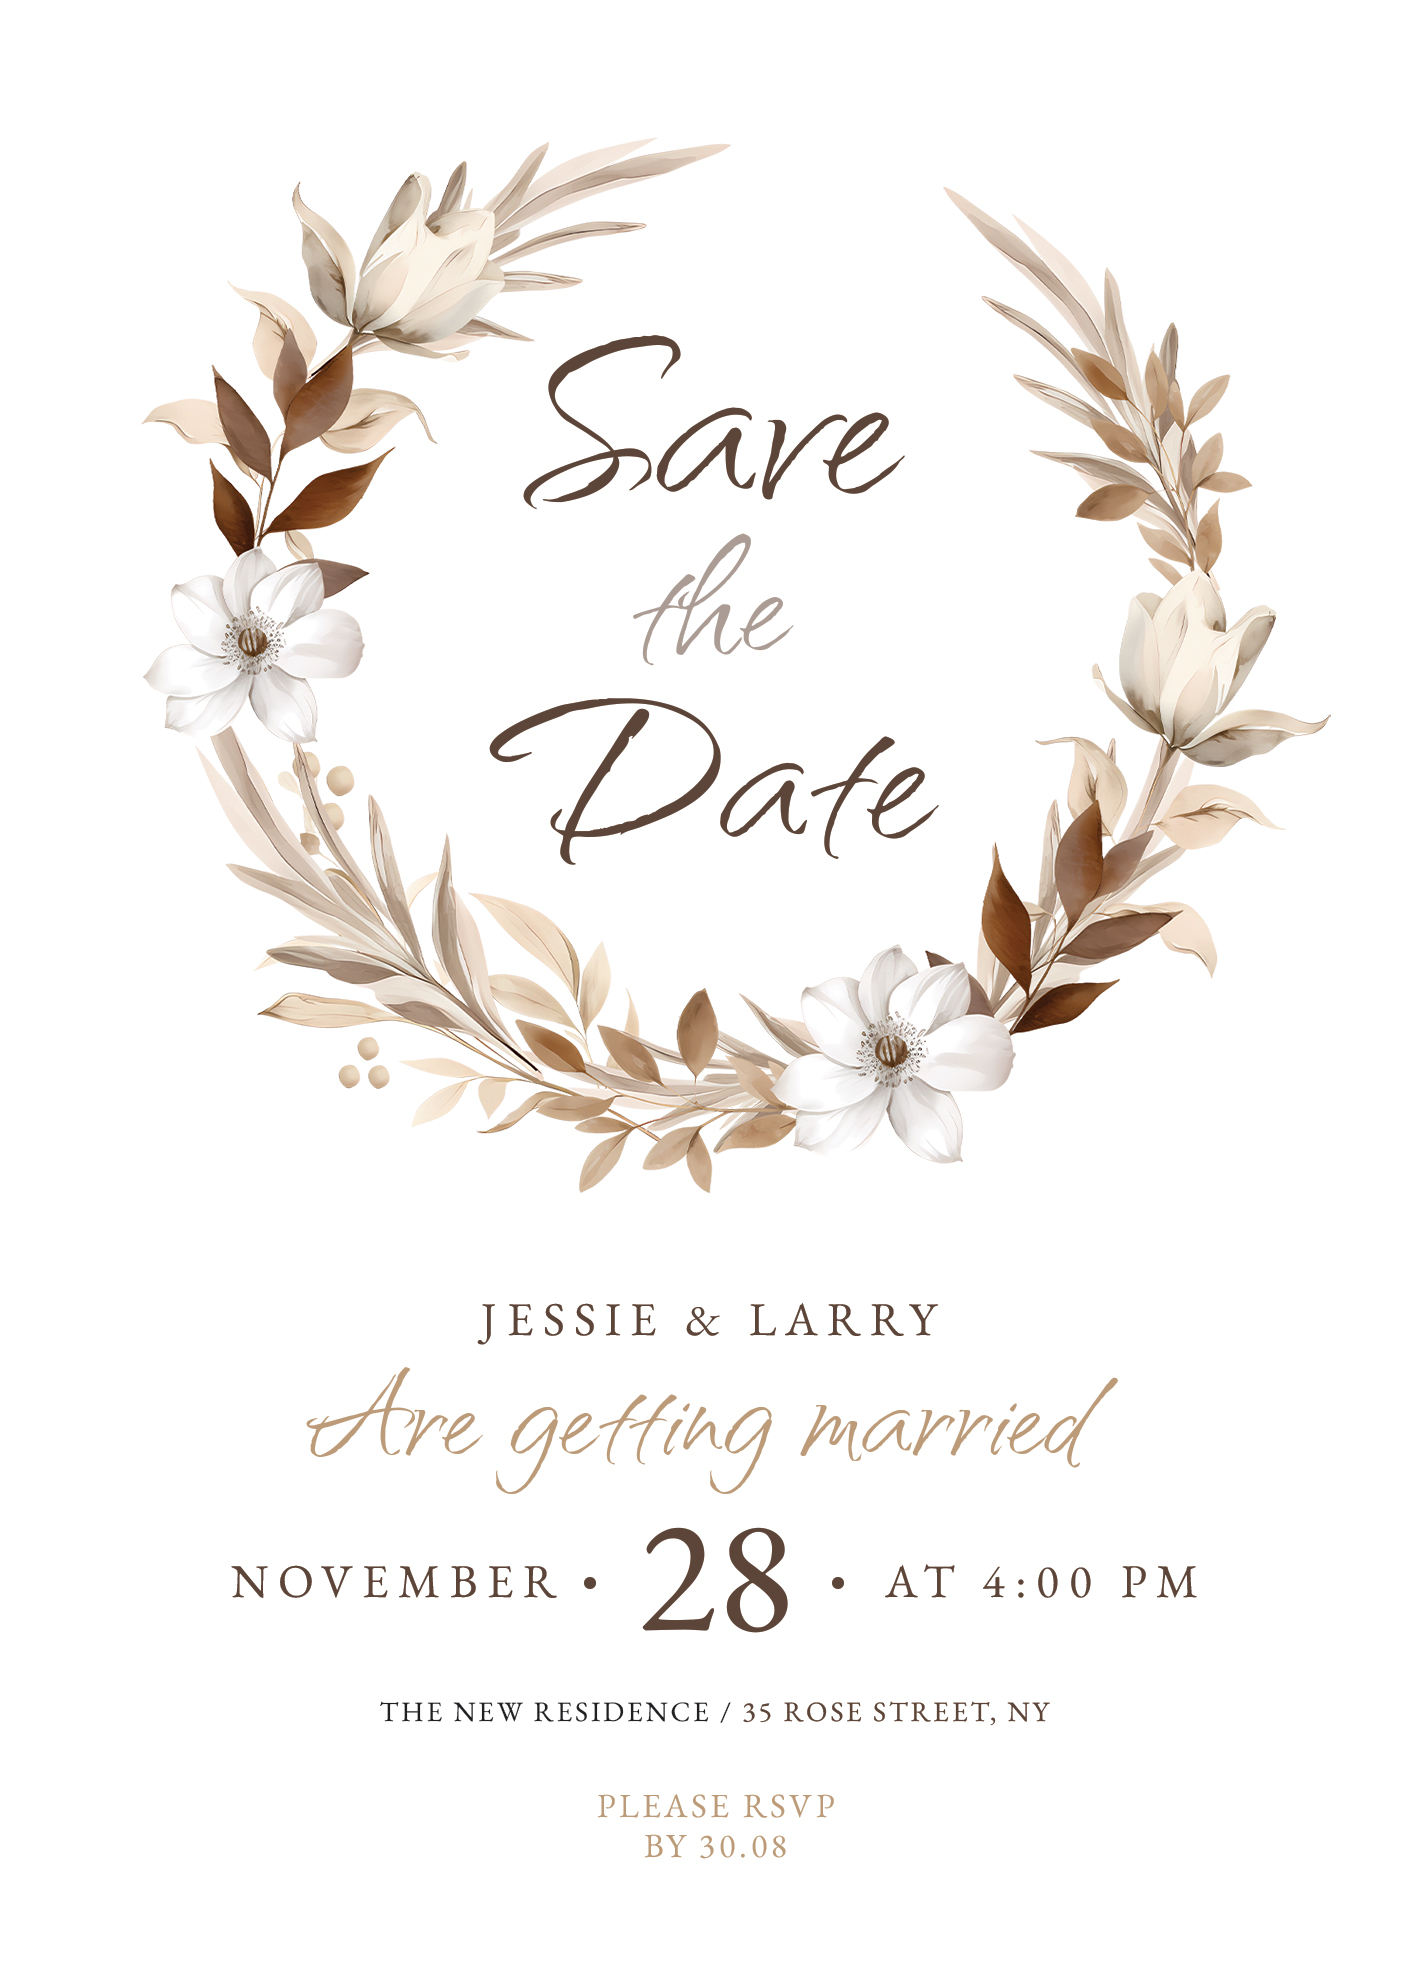 Save the date: when and how to announce your wedding